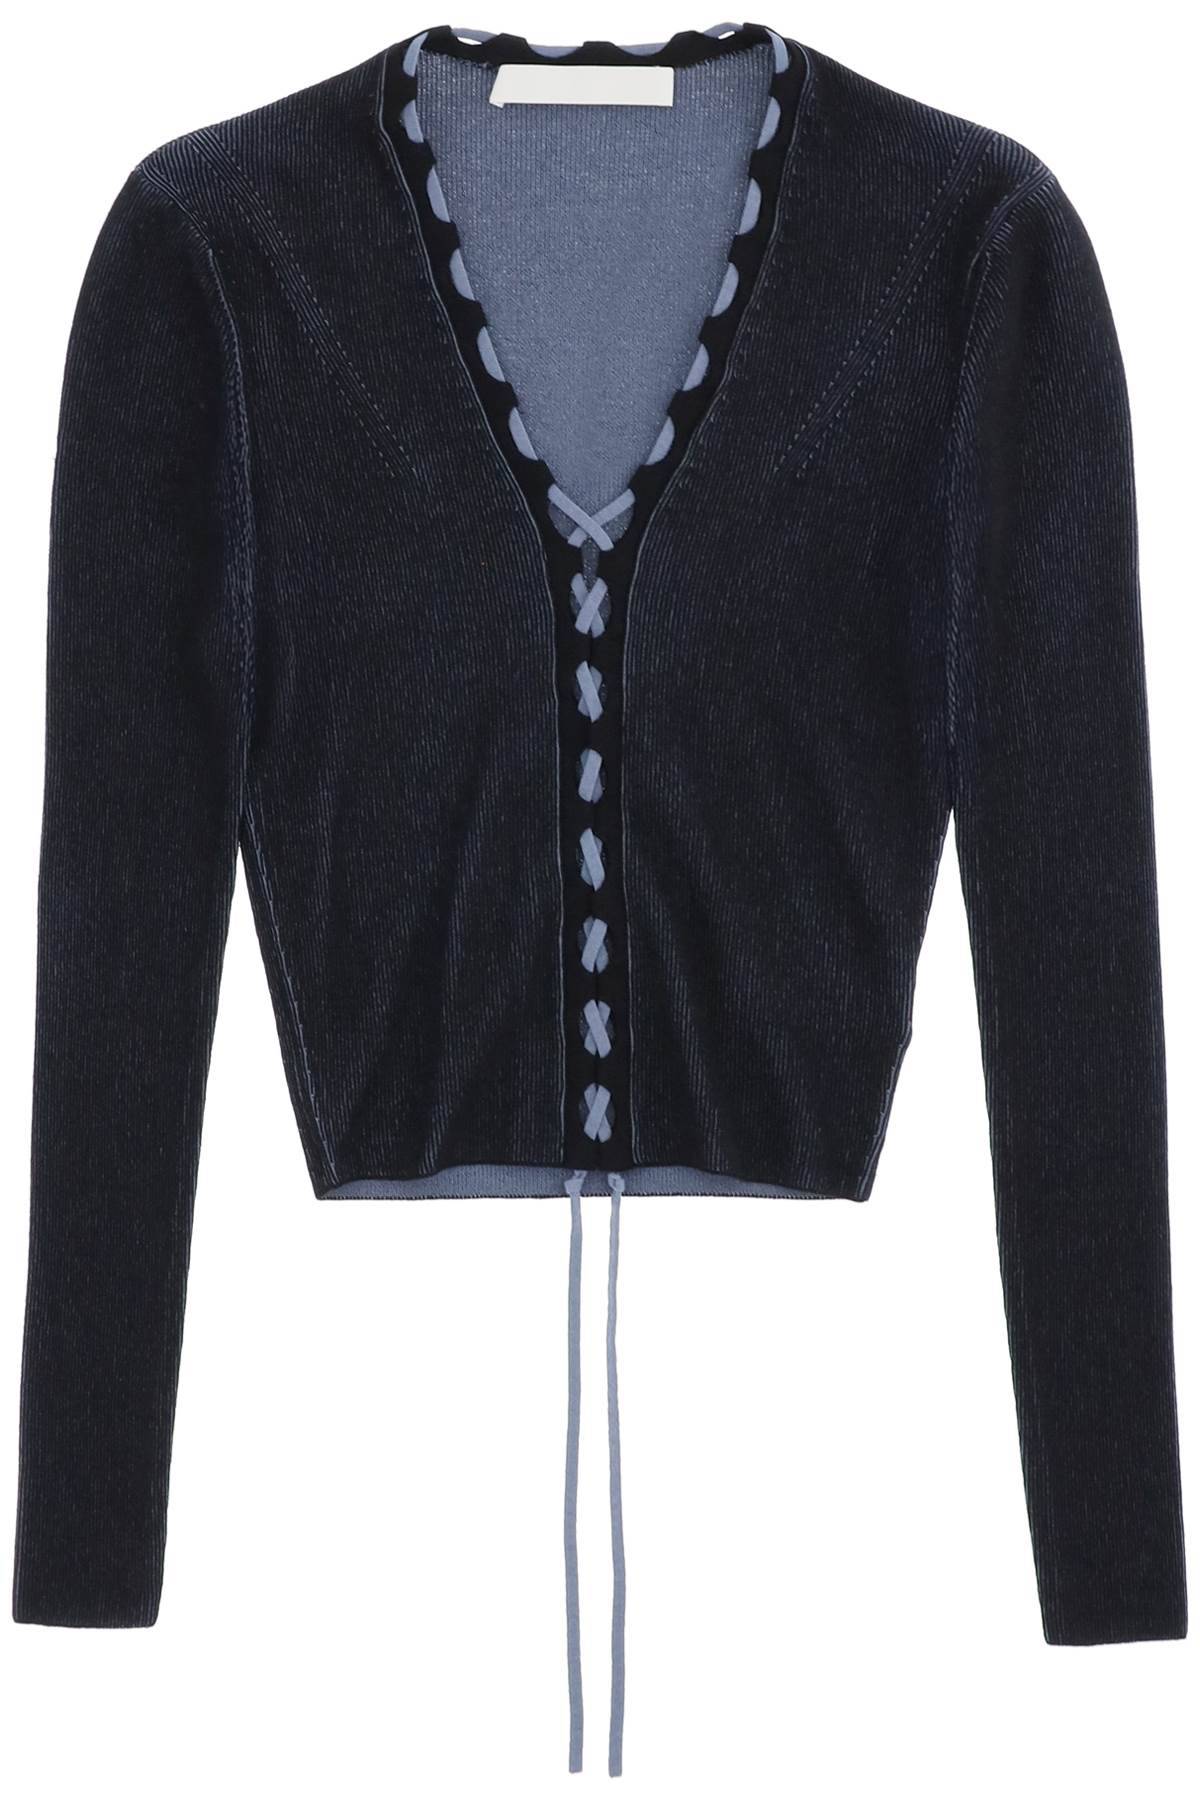 Dion Lee DION LEE two-tone lace-up cardigan